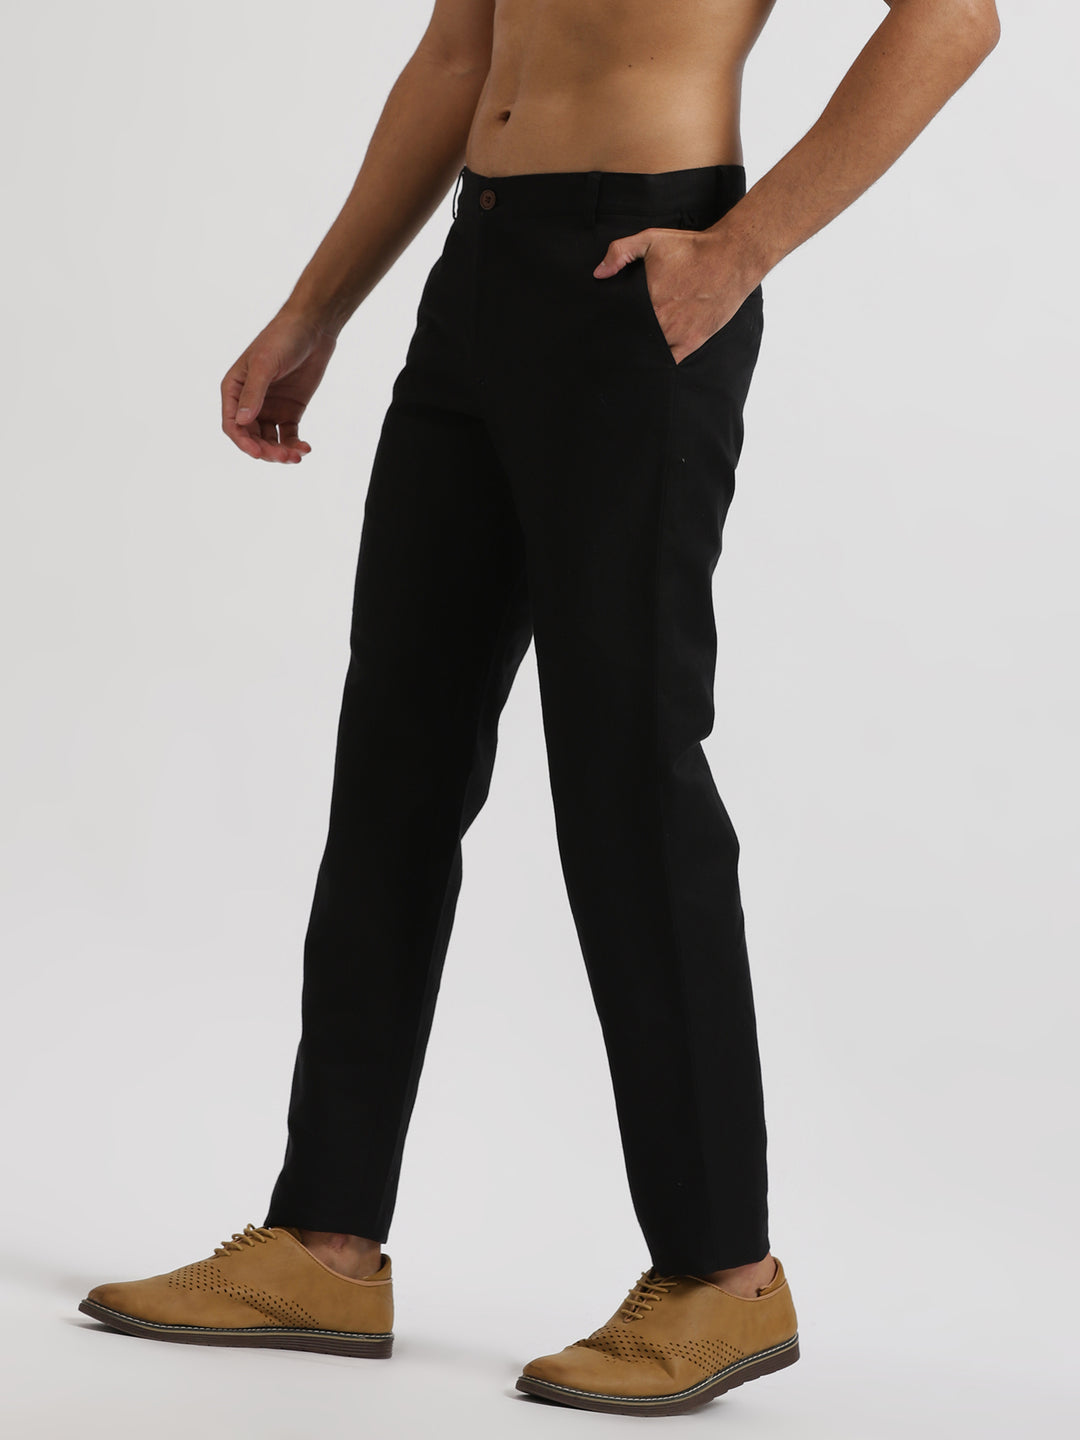 Midnight Chic Set Look | Buttoned Down Black Linen Shirt & Pure Black Trousers